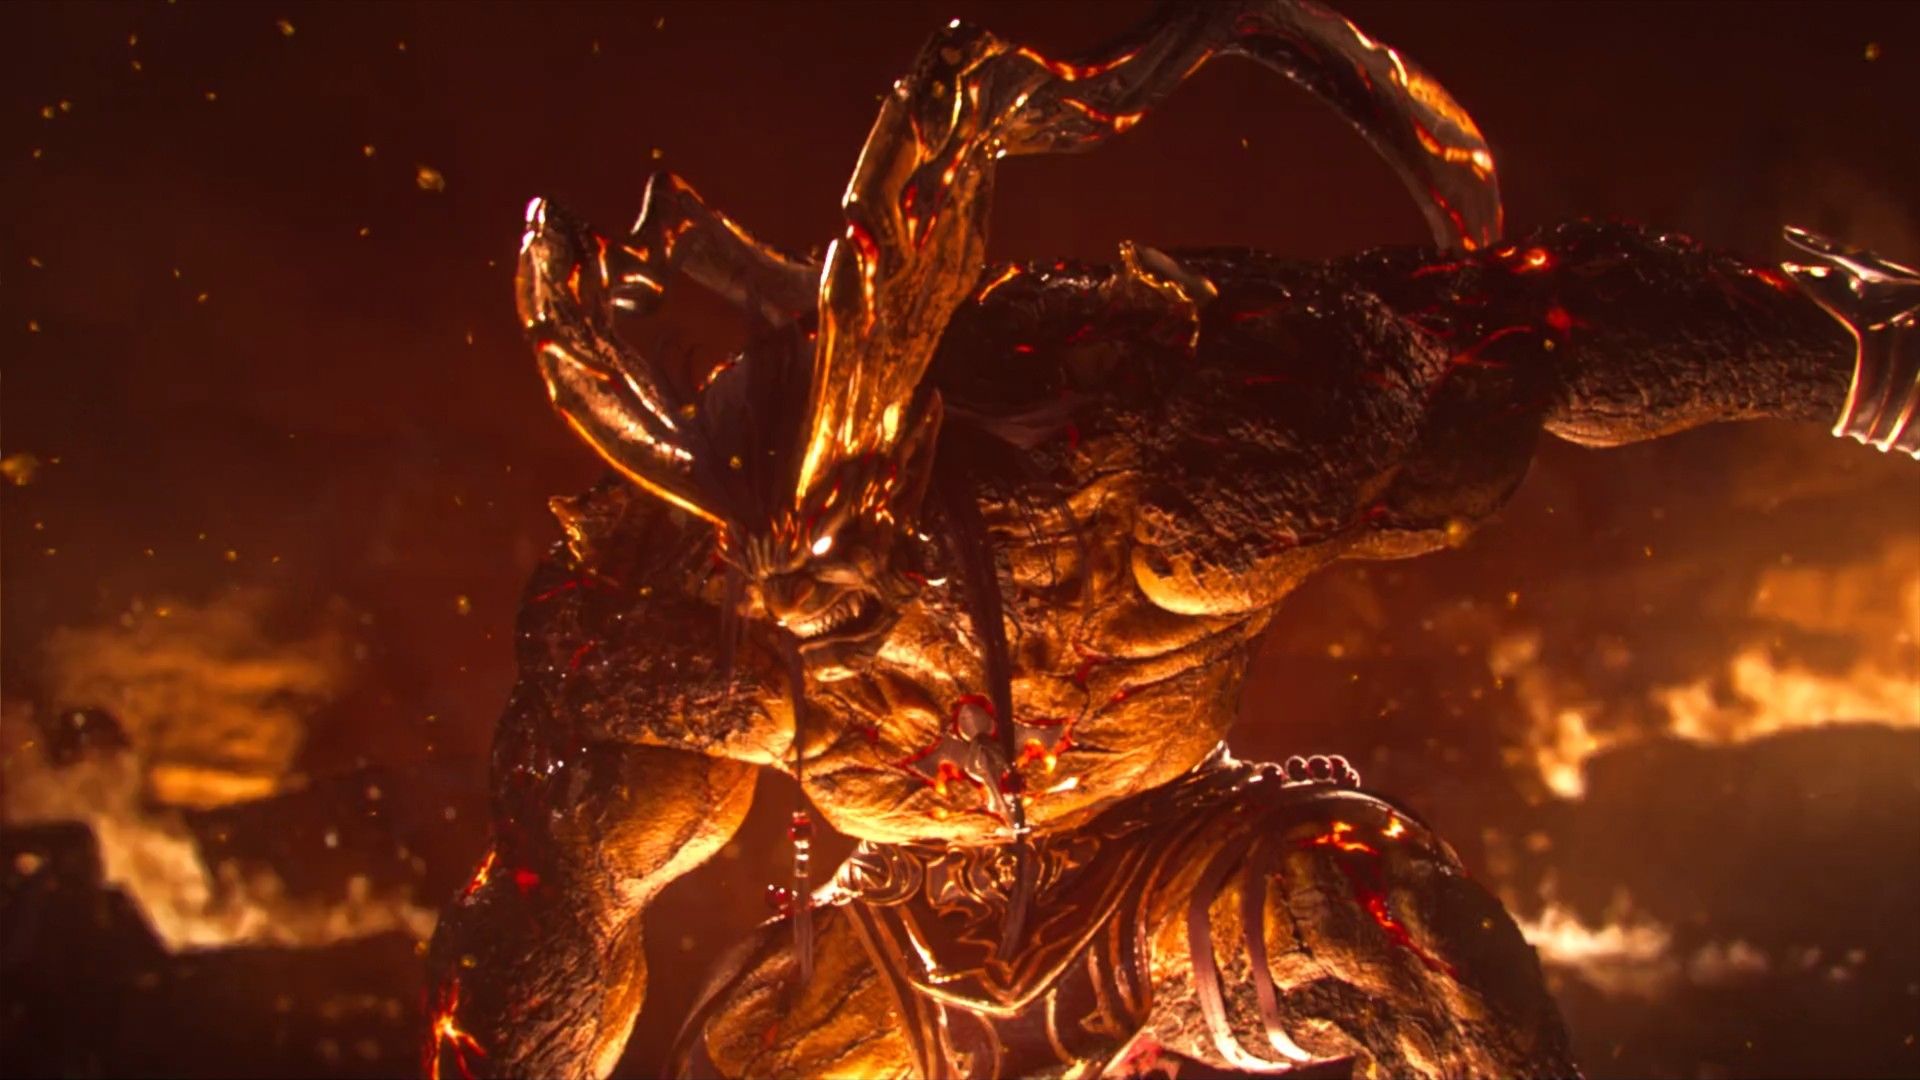 Crisis Core FF7 Ifrit fire monster summon.